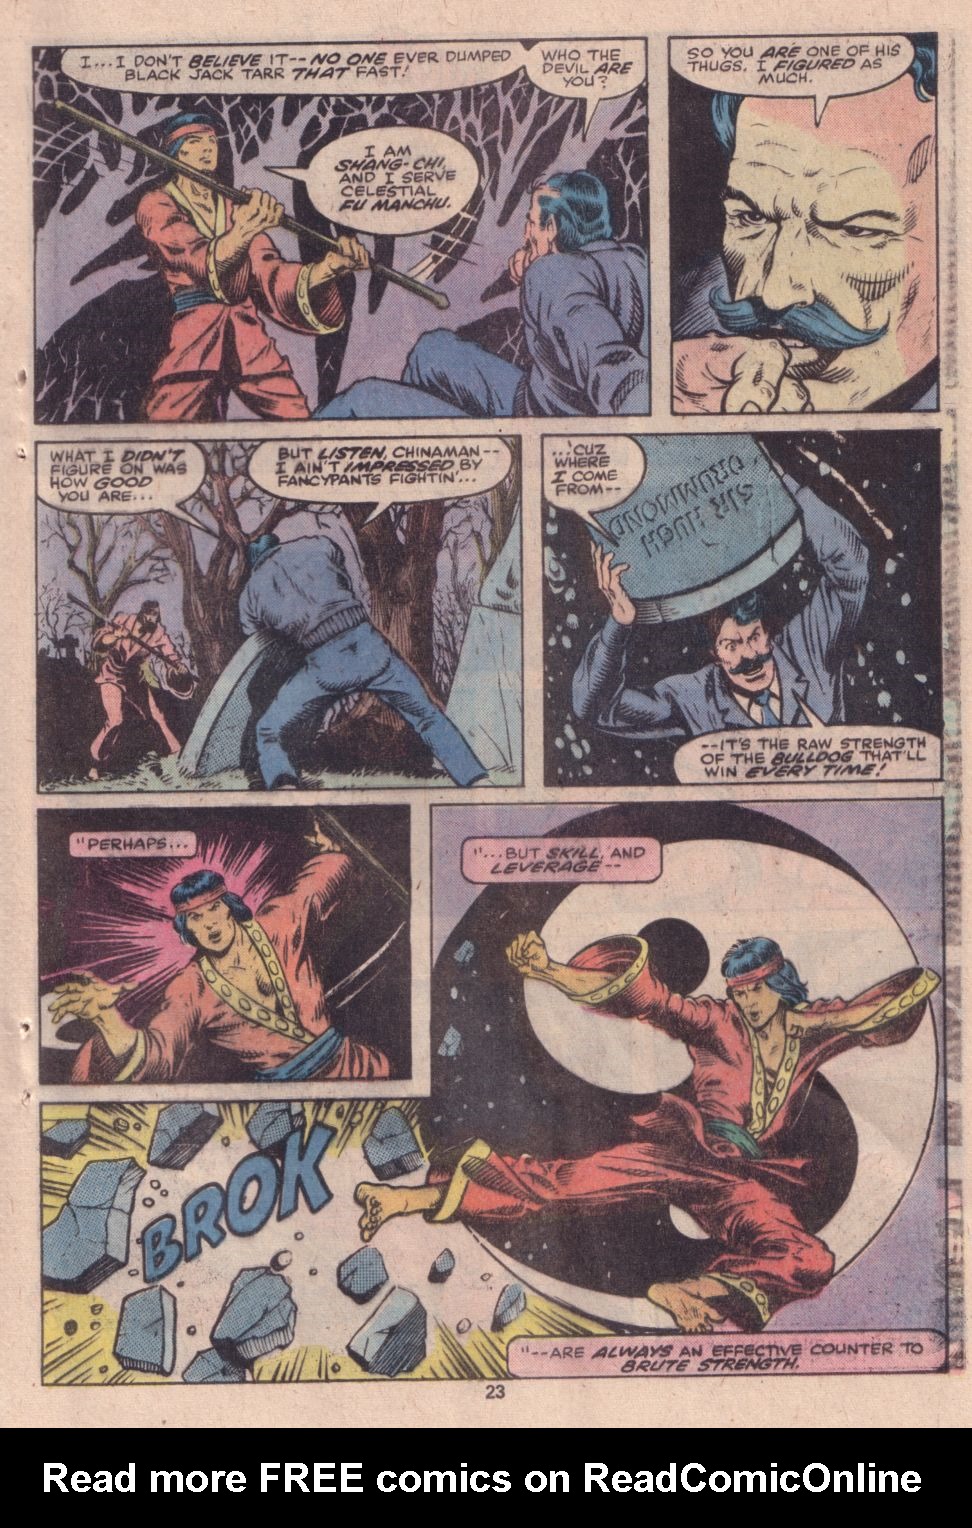 What If? (1977) issue 16 - Shang Chi Master of Kung Fu fought on The side of Fu Manchu - Page 18